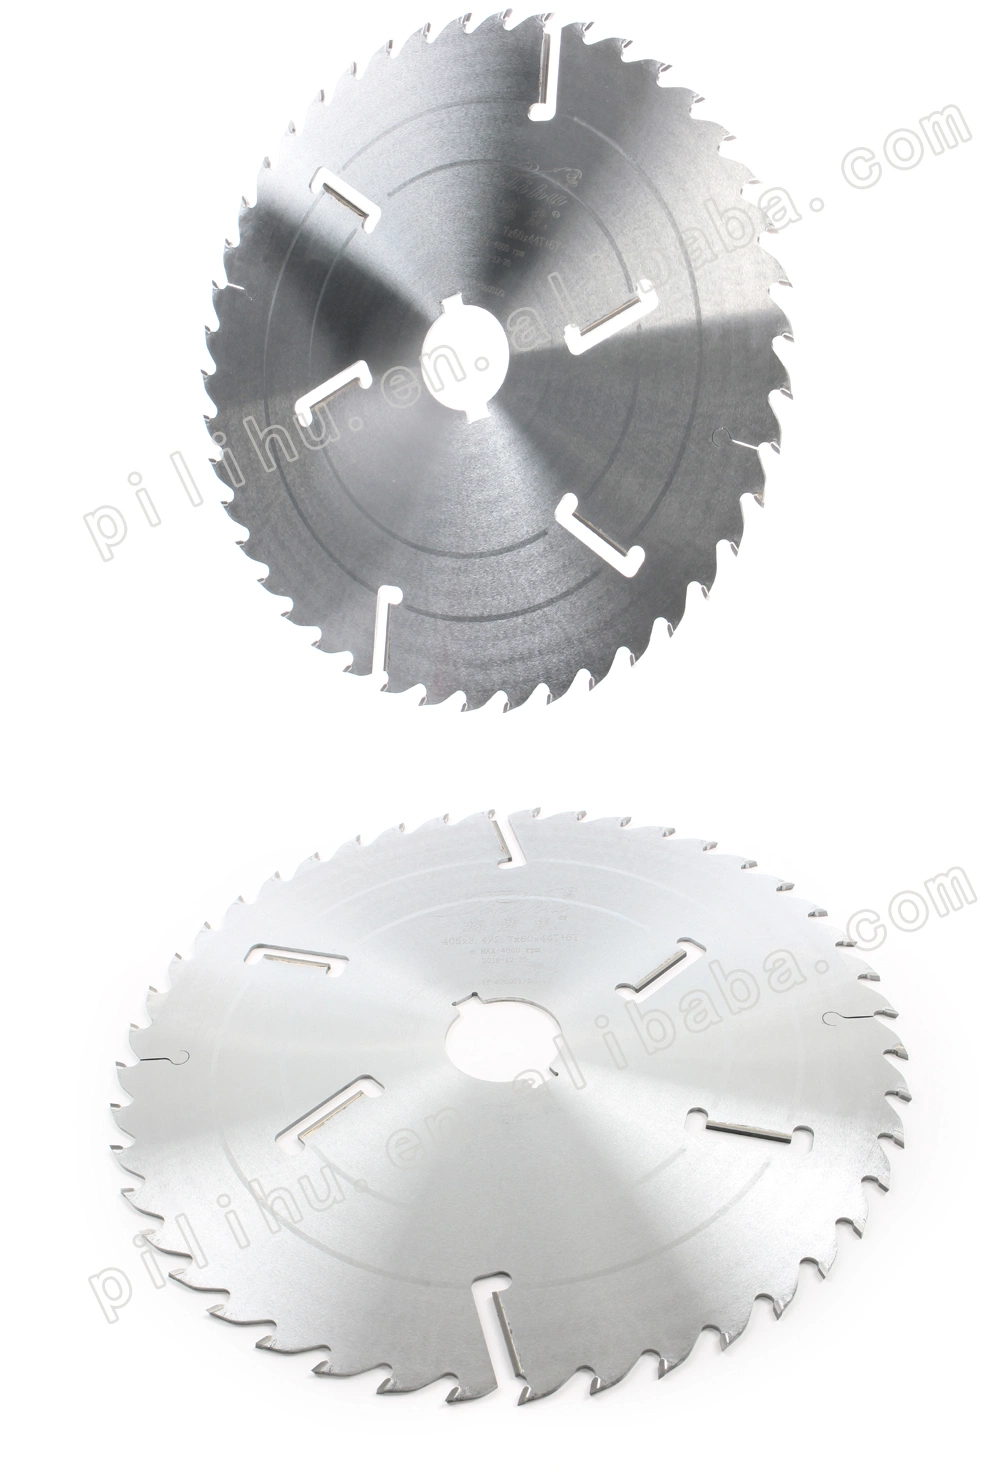 16&prime;&prime; Tct Circular Saw Blade with Scraper for Cutting Firewood